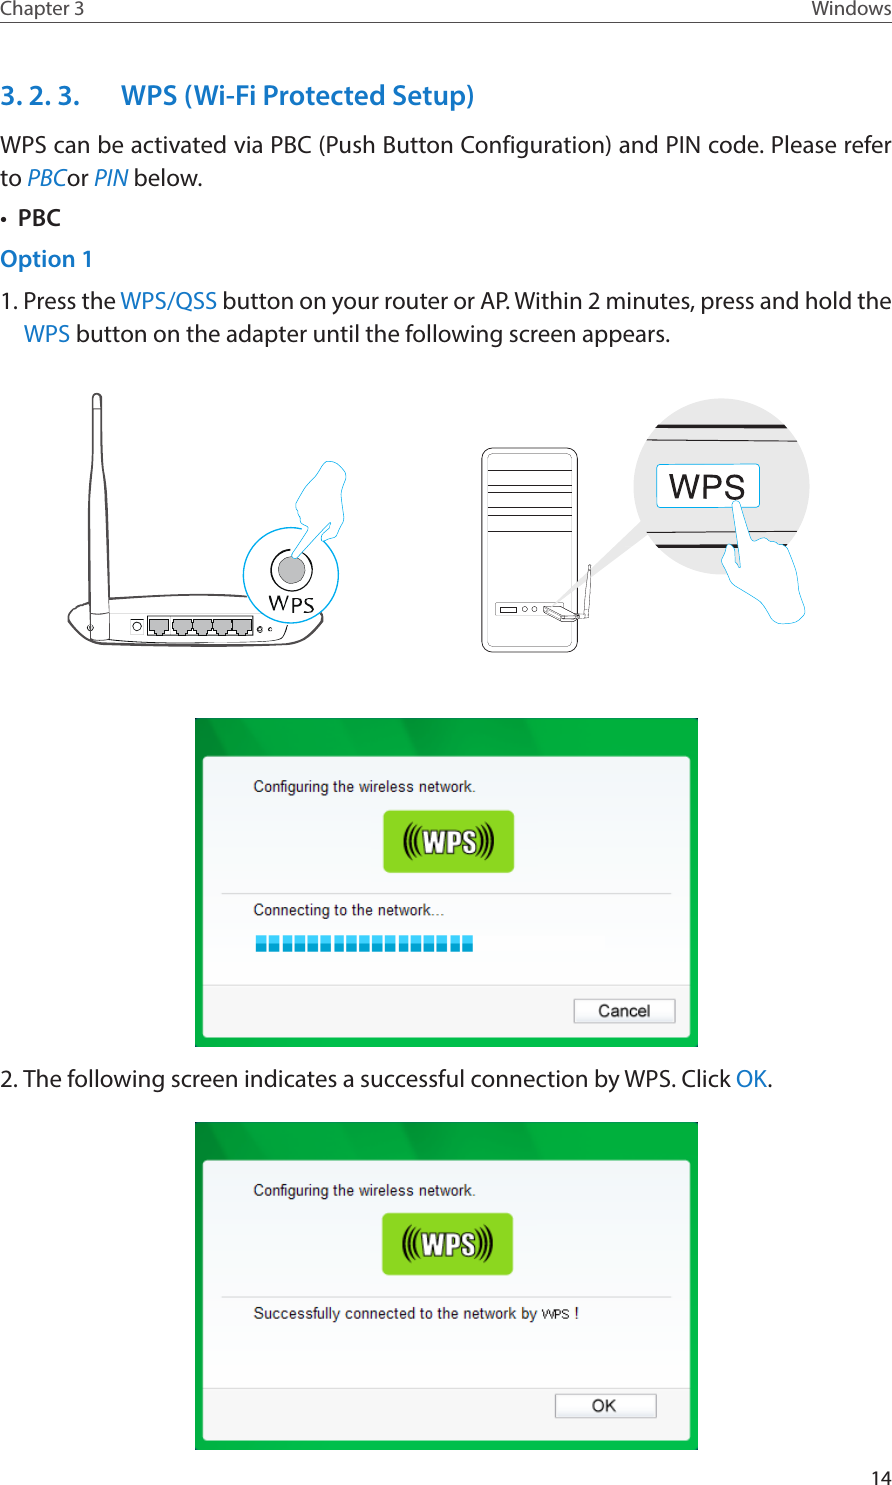 14Chapter 3 Windows3. 2. 3.  WPS (Wi-Fi Protected Setup)WPS can be activated via PBC (Push Button Configuration) and PIN code. Please refer to PBCor PIN below.•  PBCOption 11. Press the WPS/QSS button on your router or AP. Within 2 minutes, press and hold the WPS button on the adapter until the following screen appears.2. The following screen indicates a successful connection by WPS. Click OK.